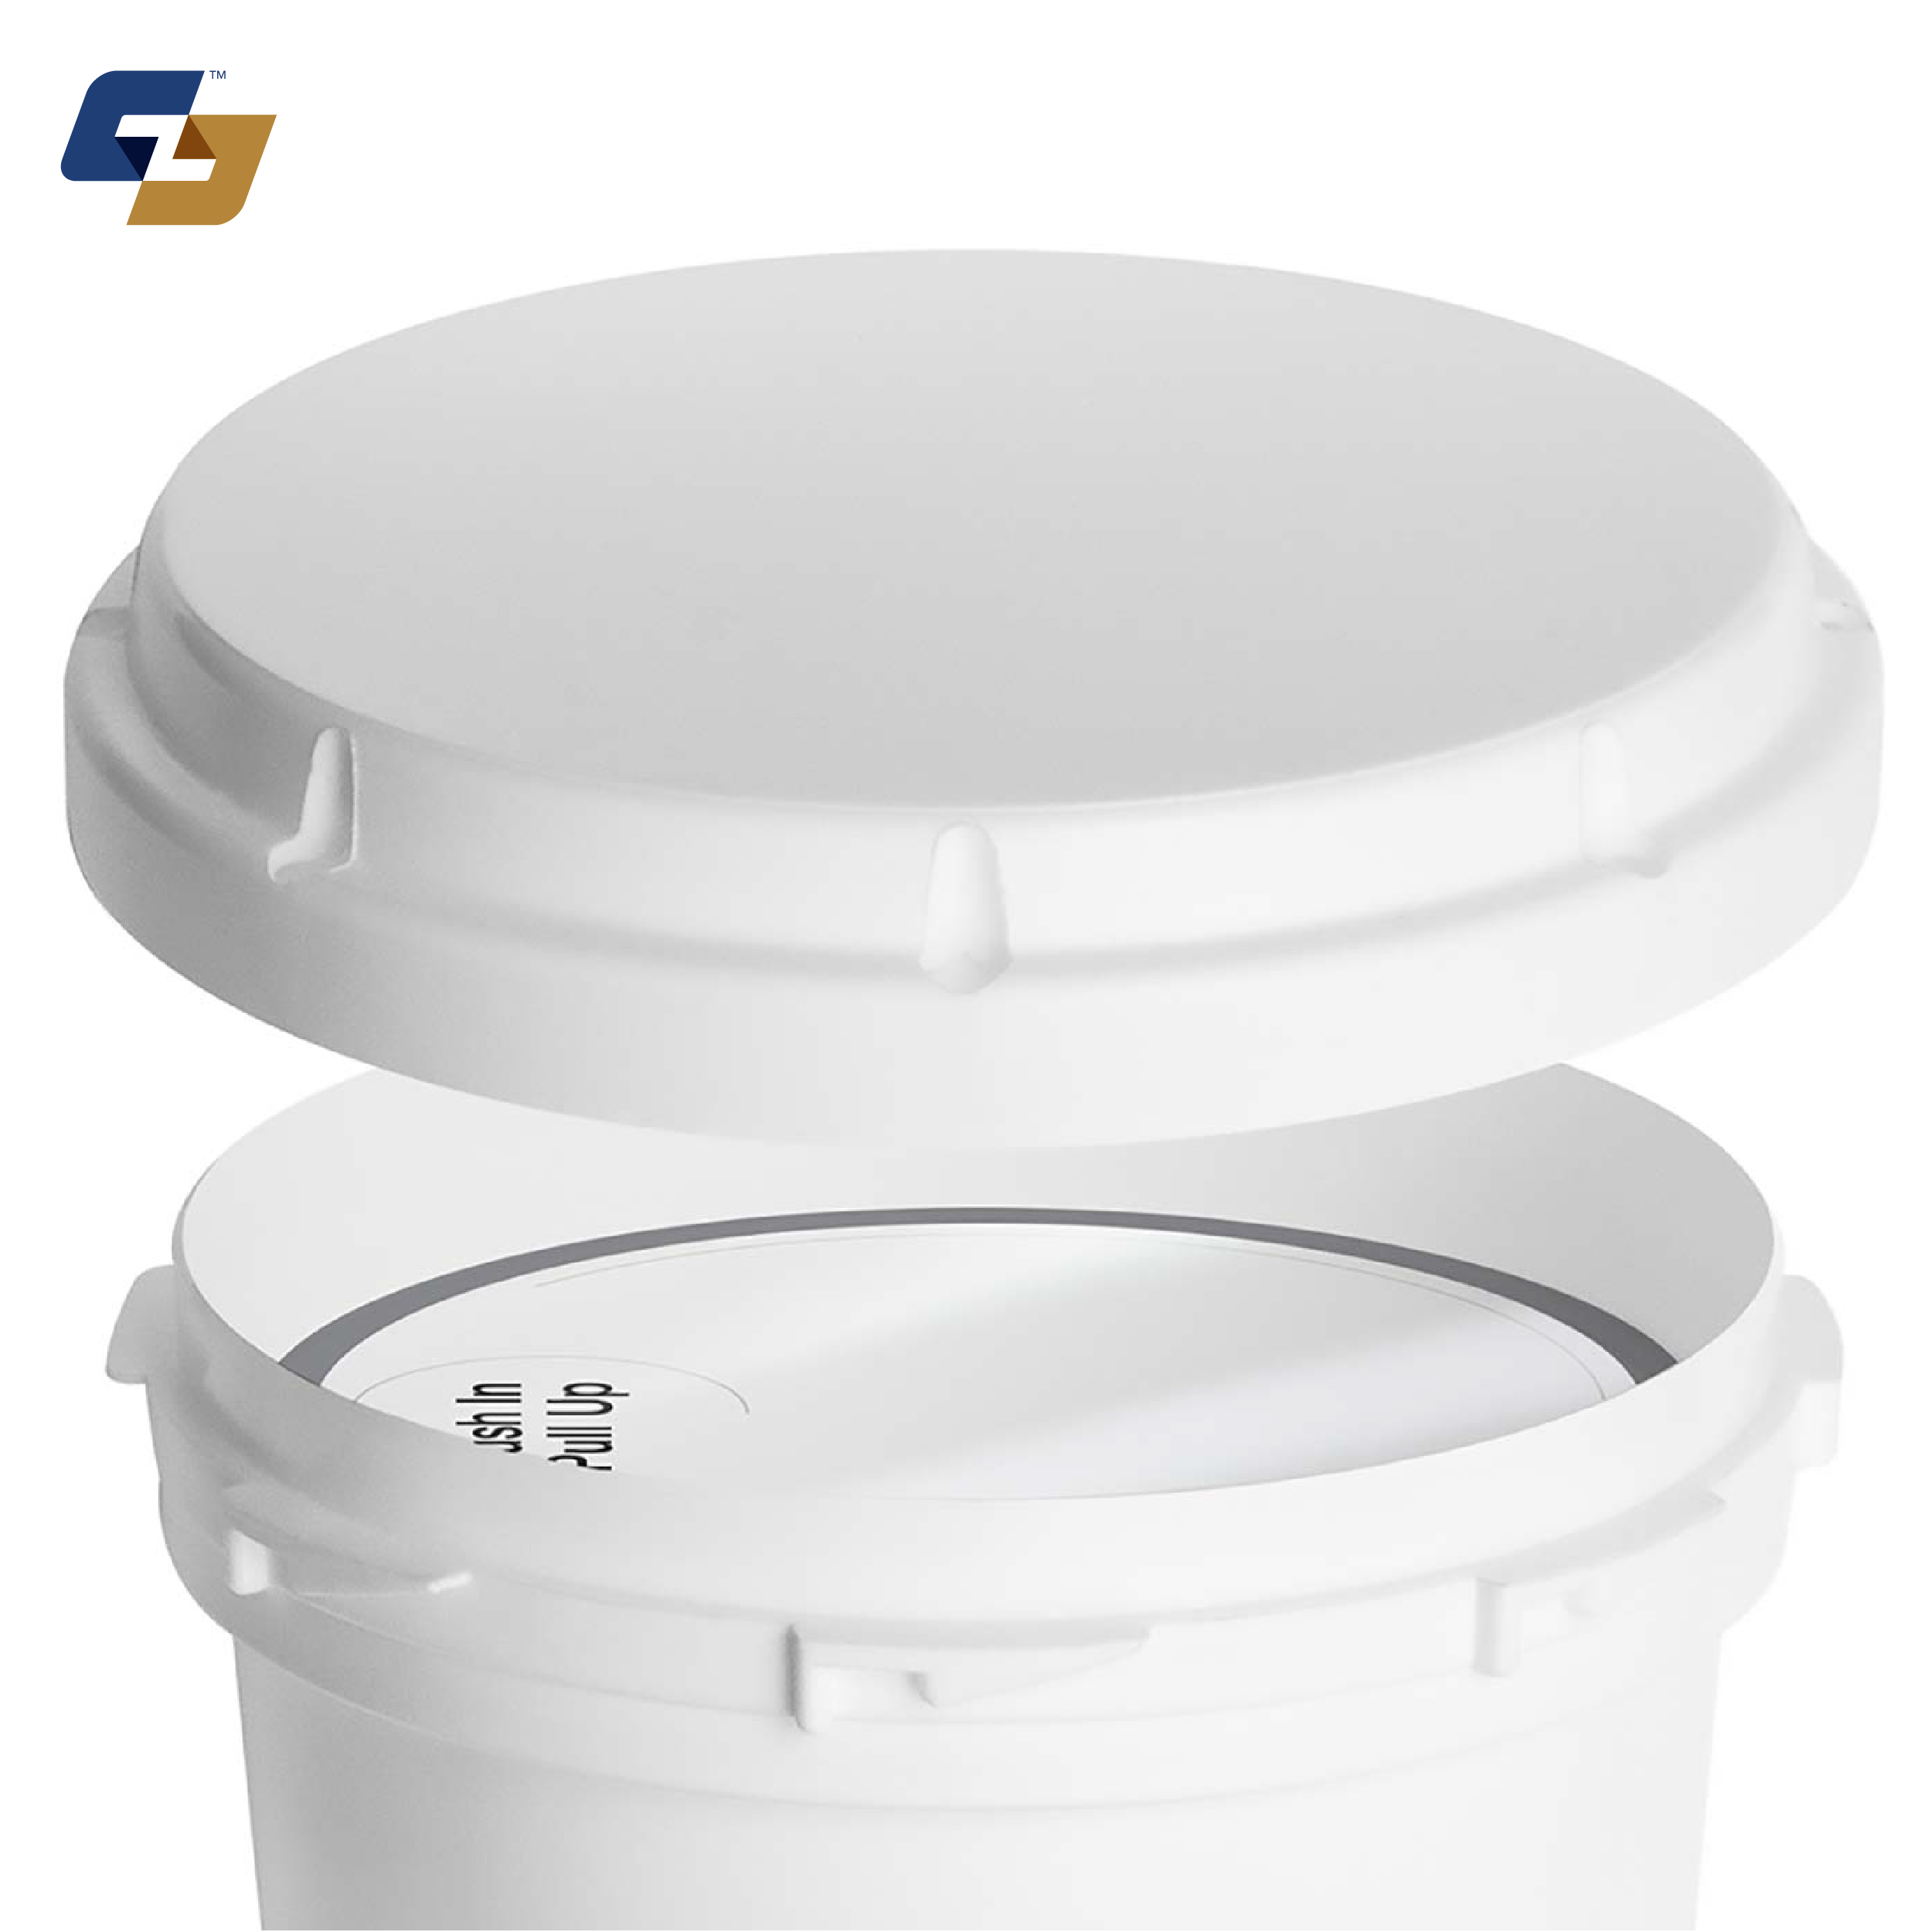 Clear Seals for Visibowlz™ - 500ct - Fits All Sizes